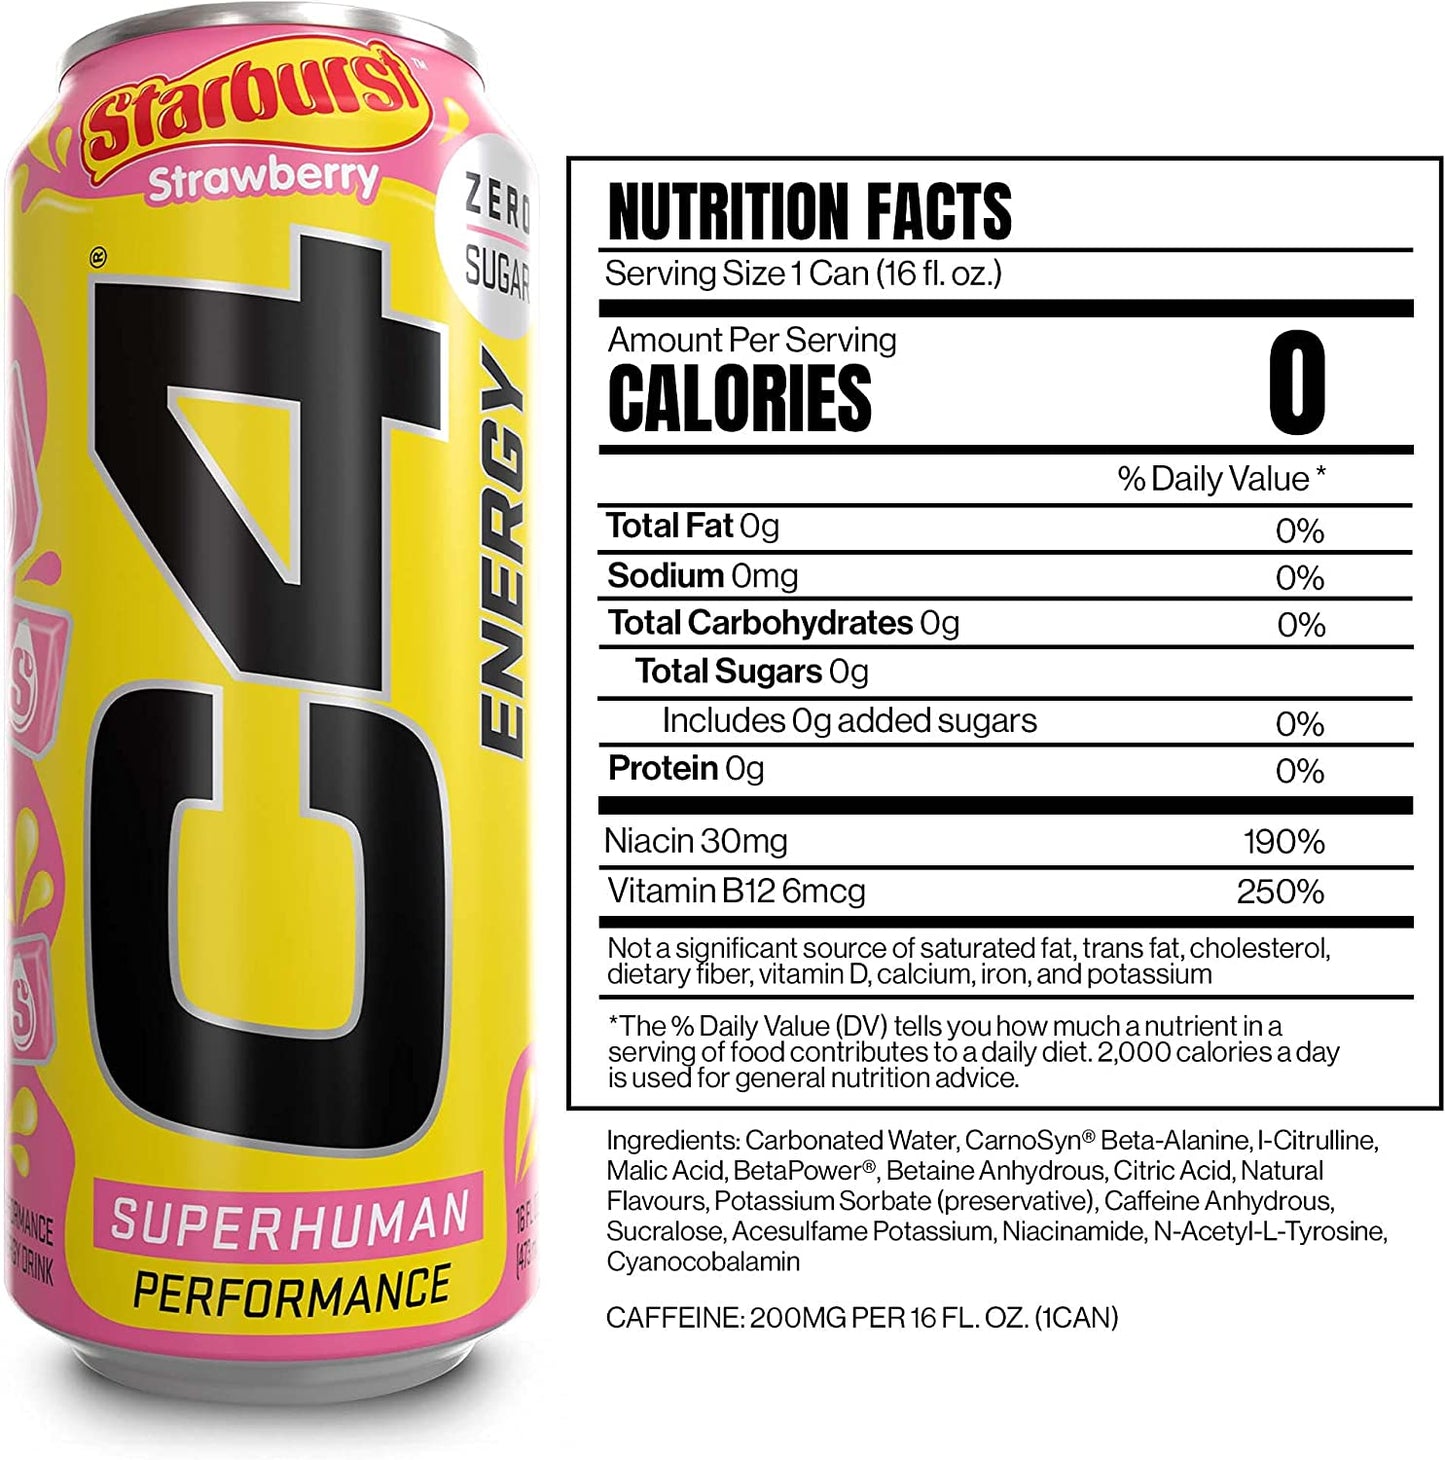 C4 Energy Drink by Cellucor | STARBURST Strawberry 473ml pack of 12